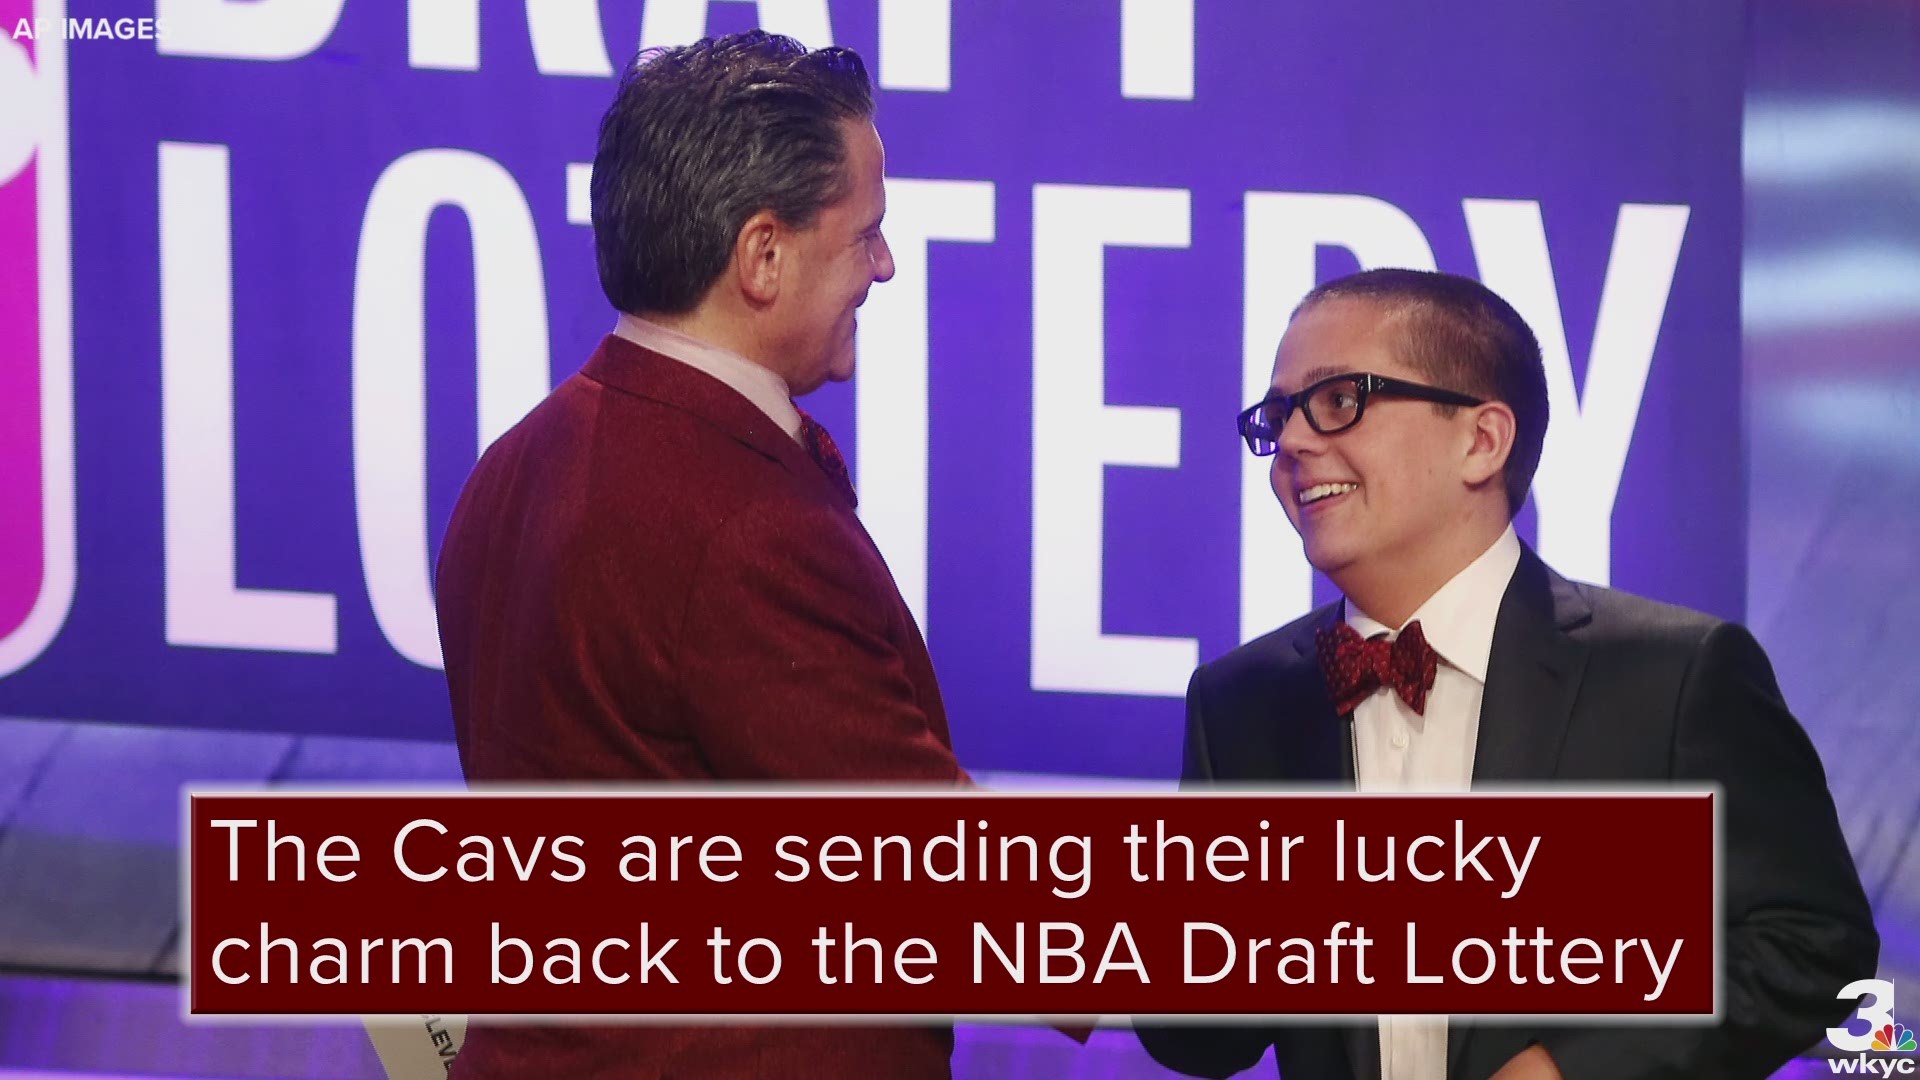 Nick Gilbert, the son of Cleveland Cavaliers owner Dan Gilbert, will represent the team at the NBA Draft Lottery in Chicago next week.